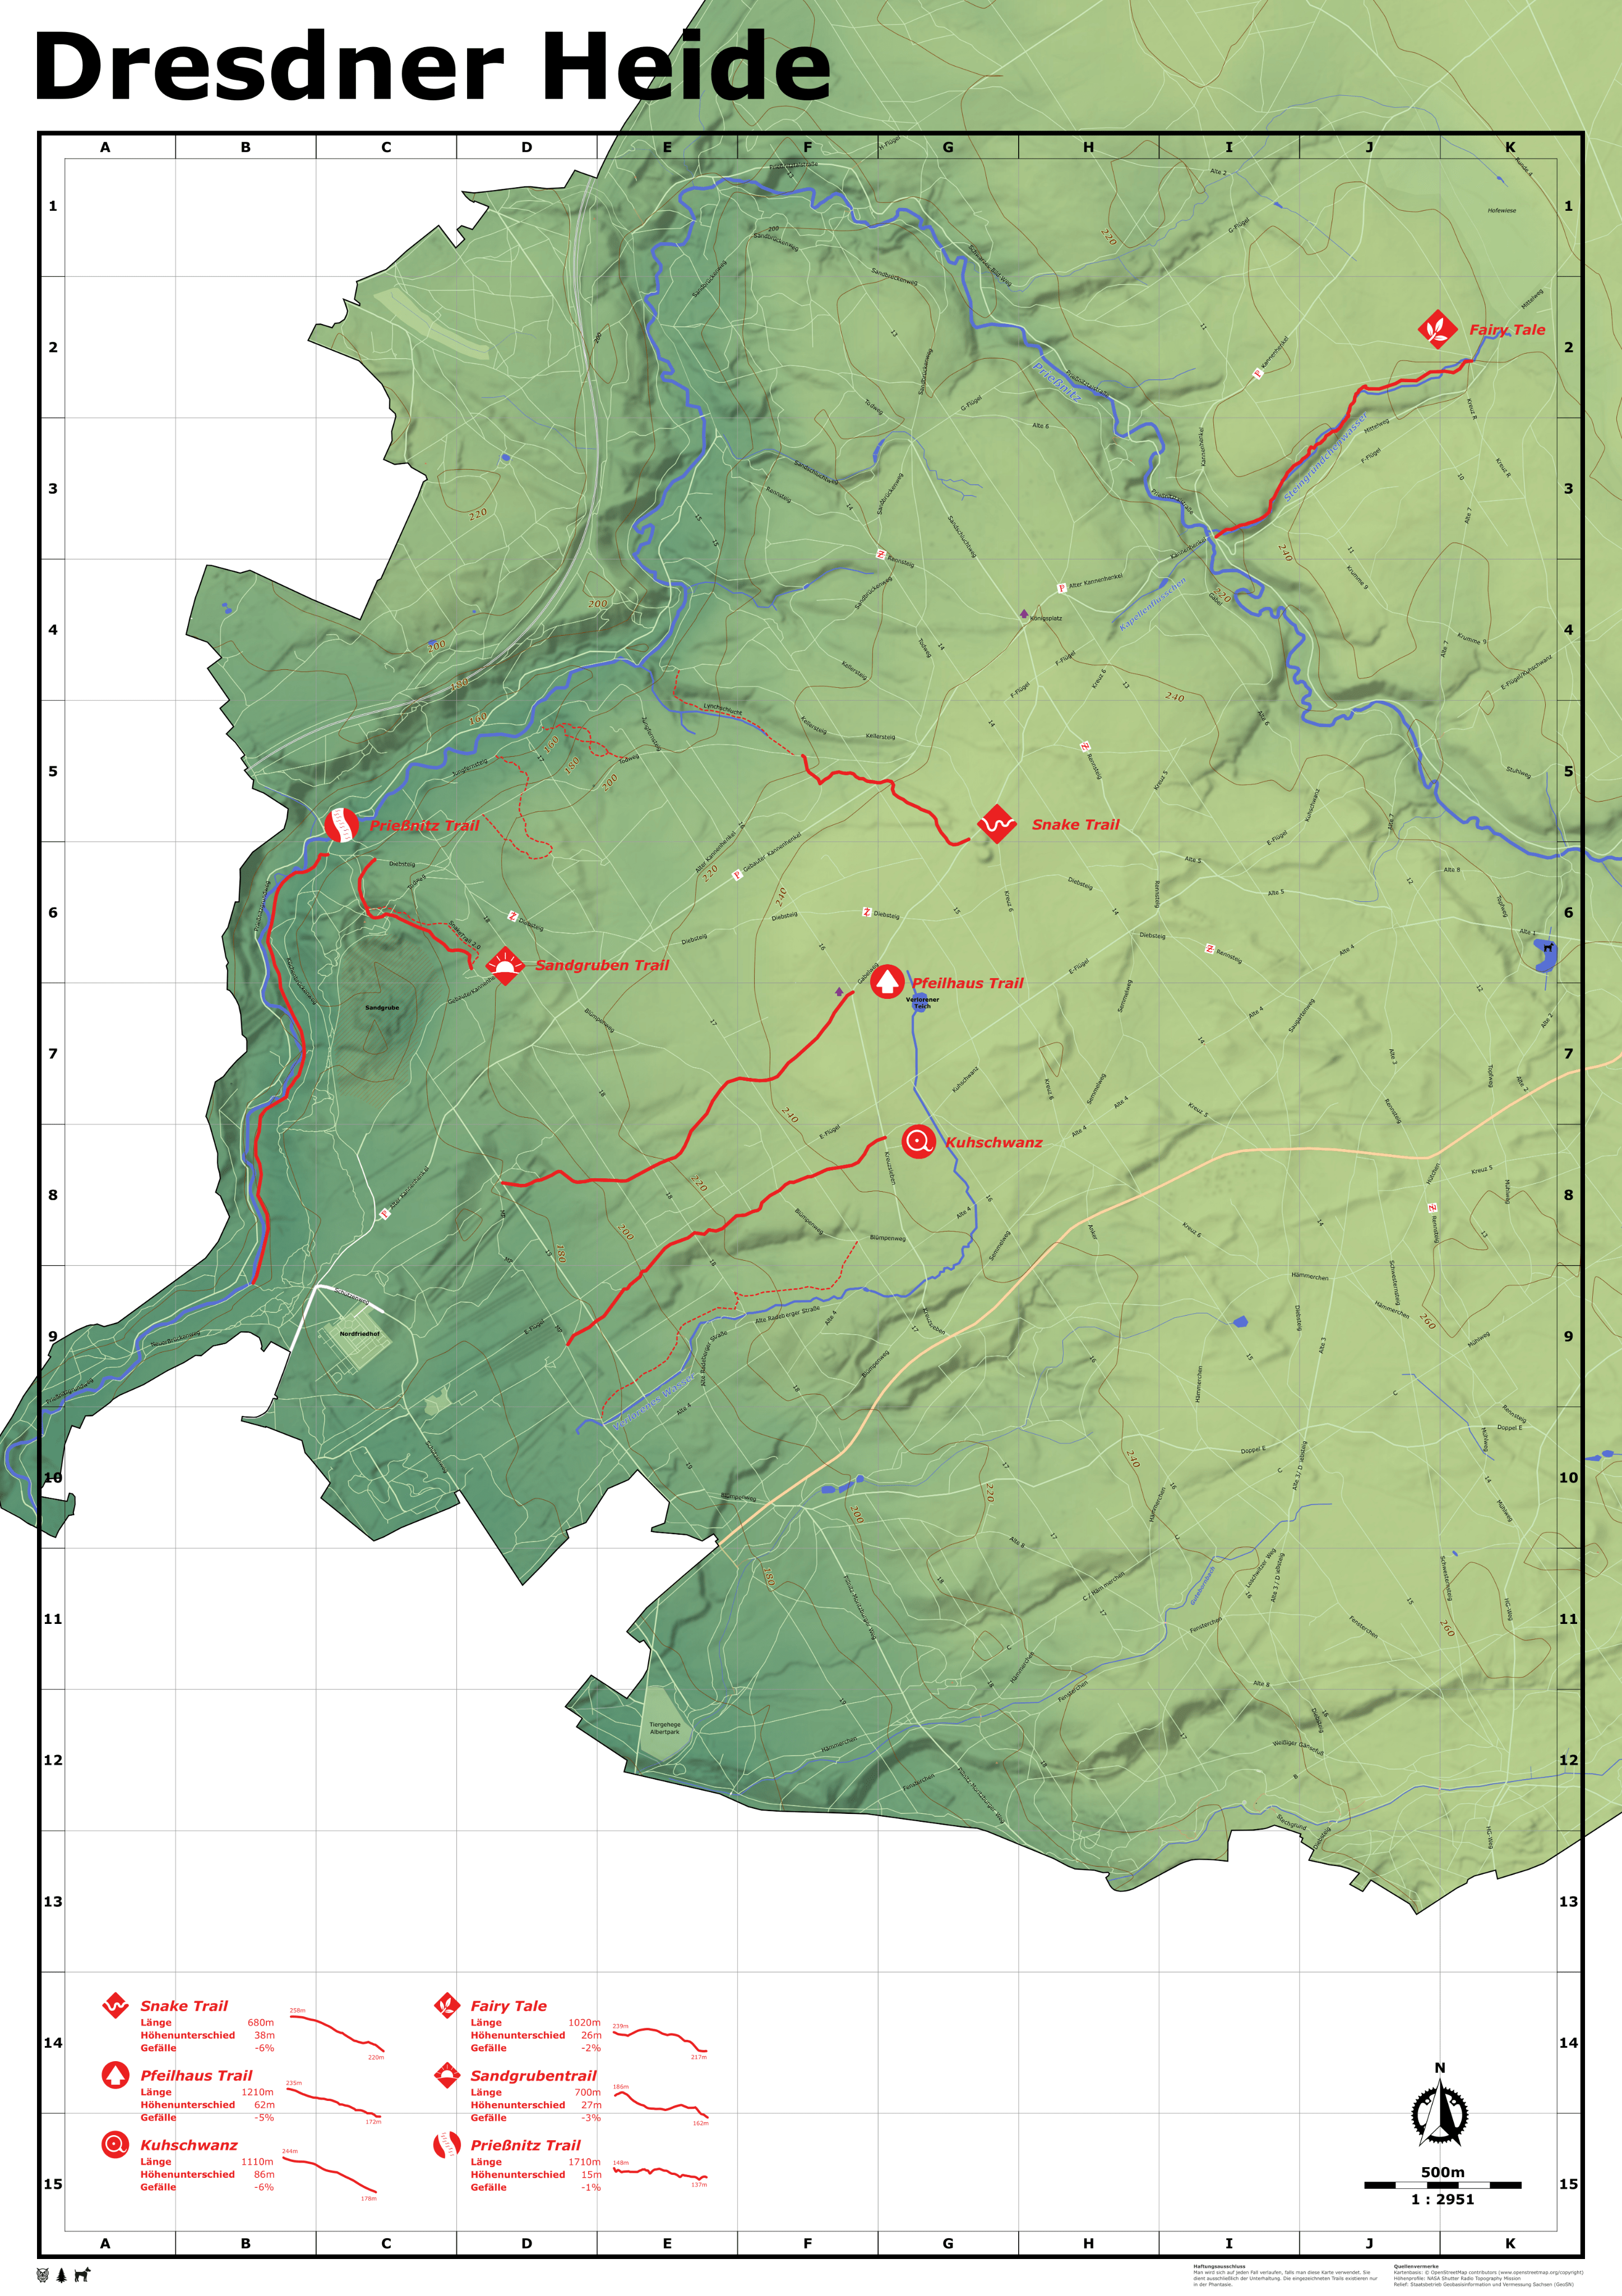 A map of a forest area with some mountain biking trails highlighted in red